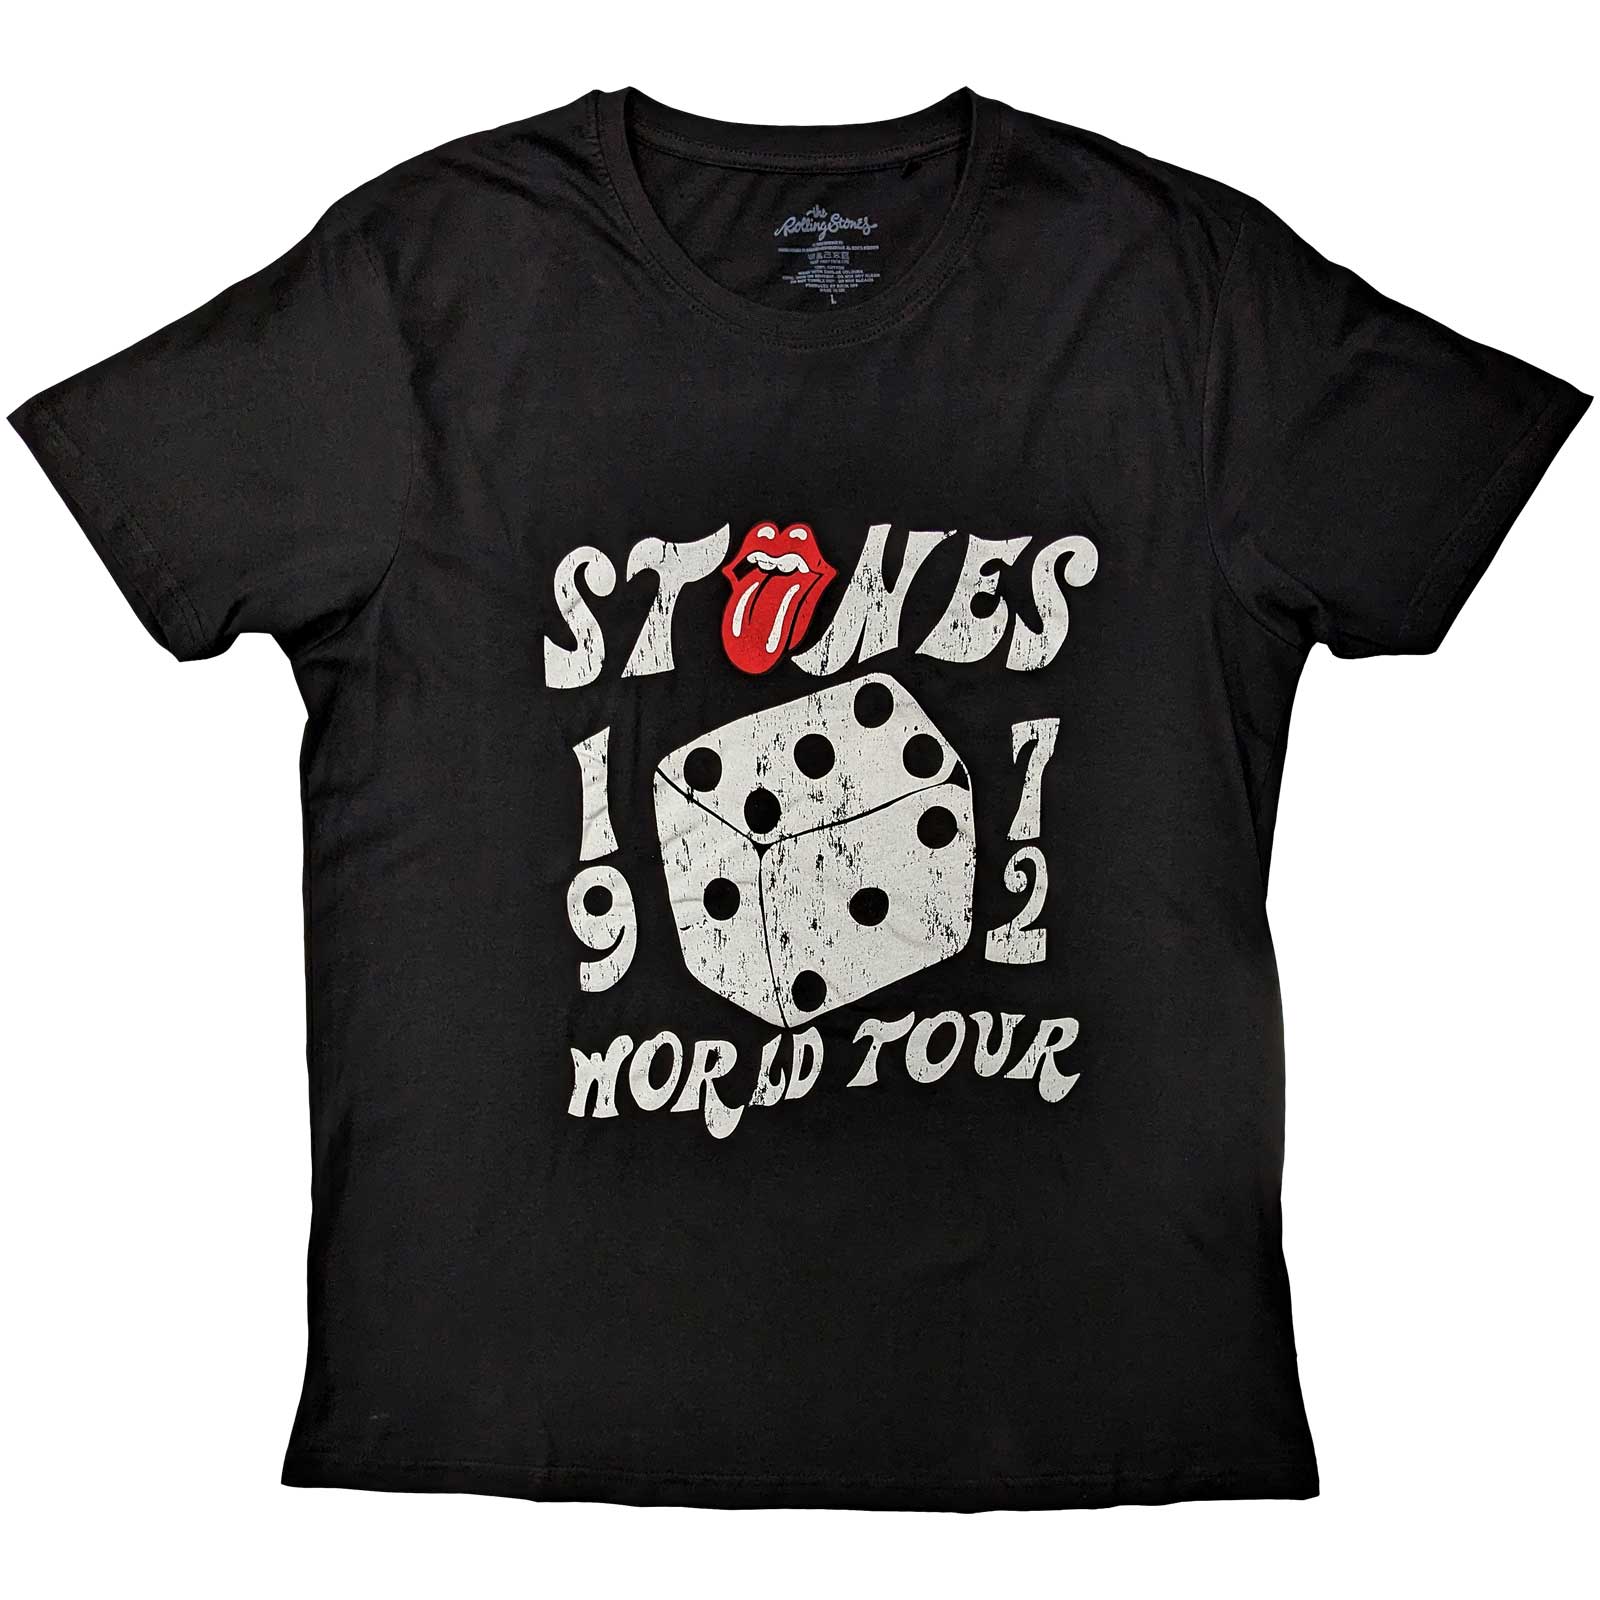 THE ROLLING STONES Dice Tour 72